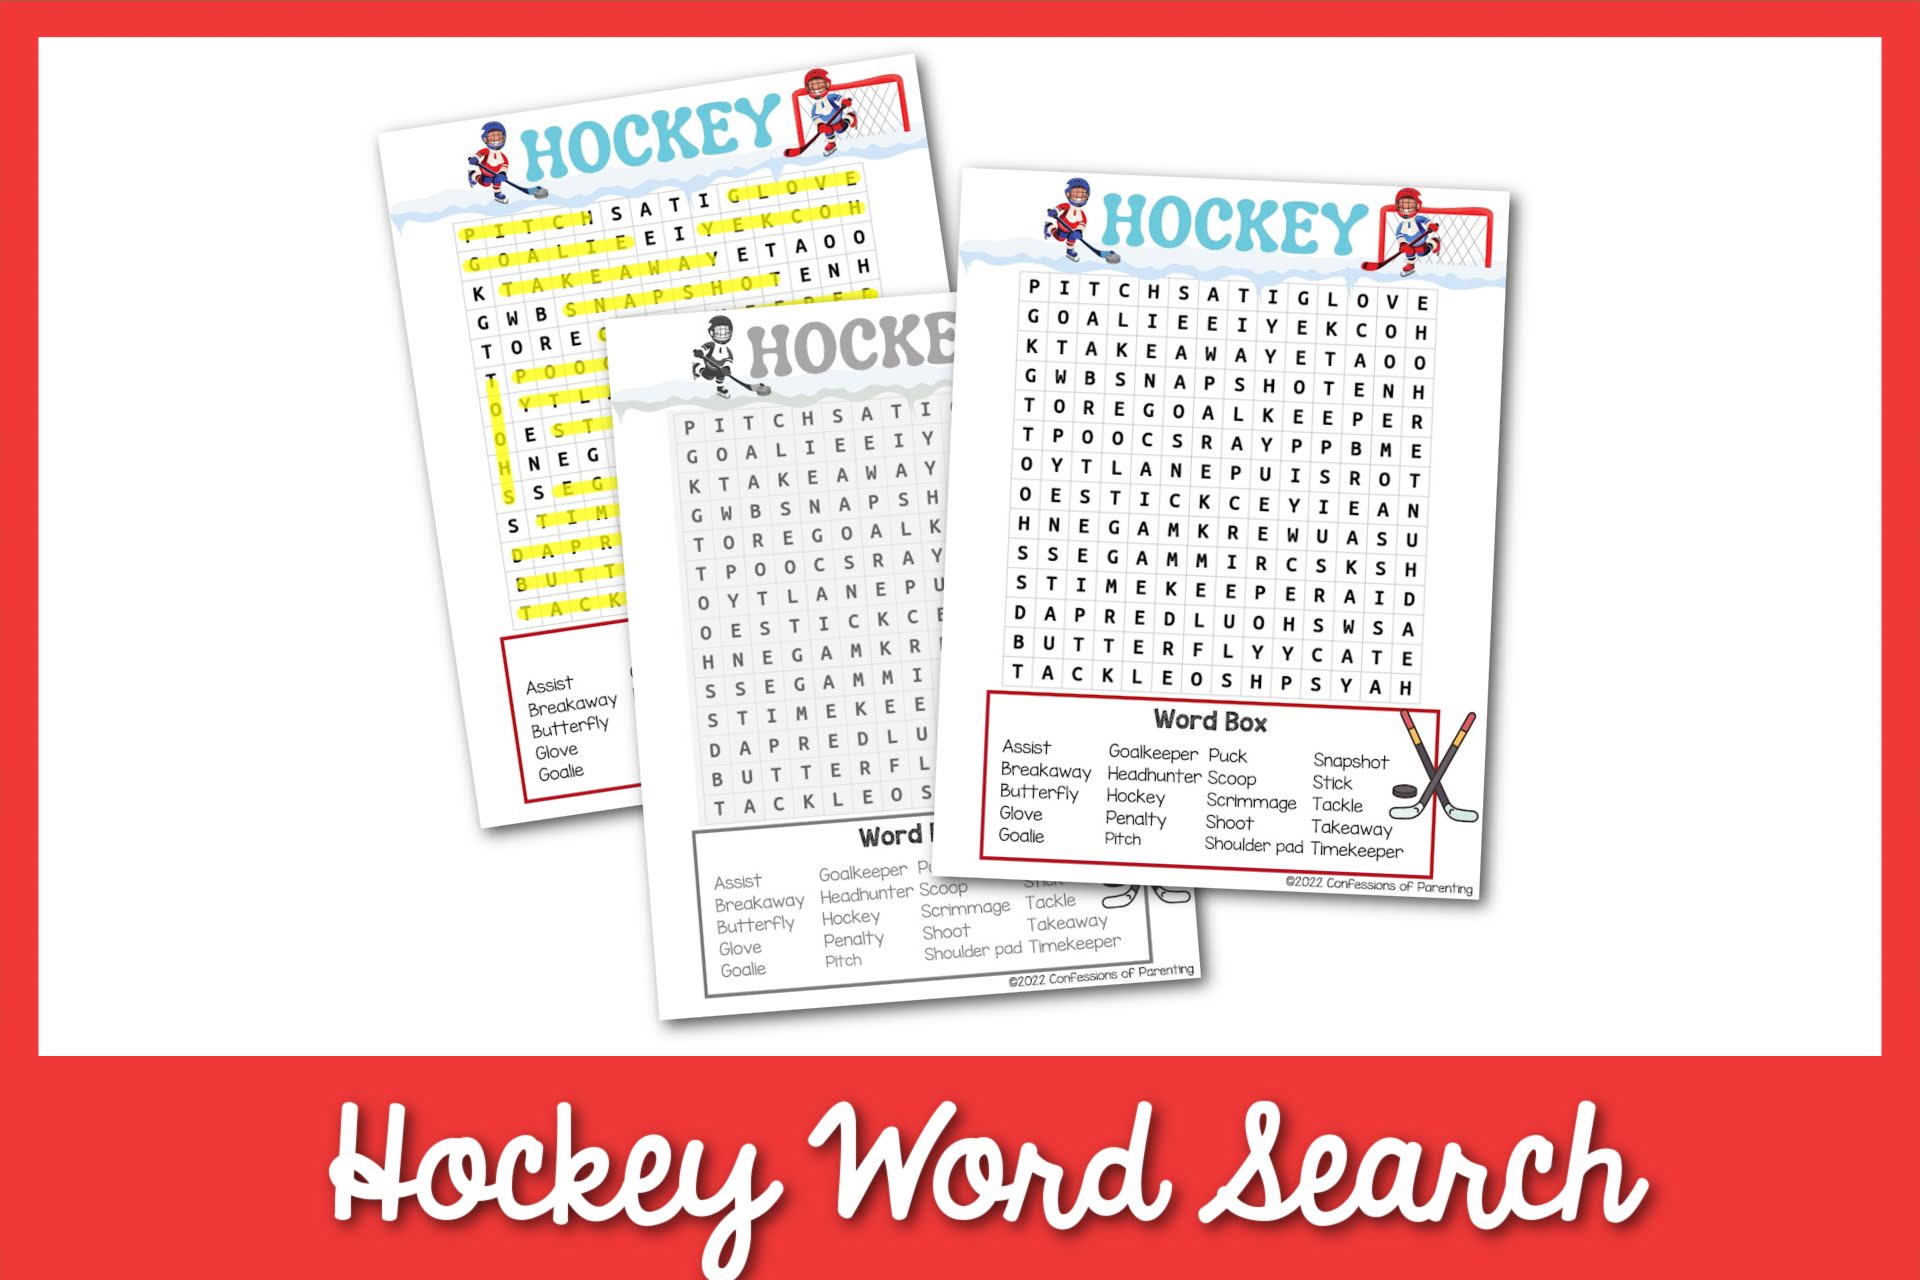 featured image: hockey word search on a red border